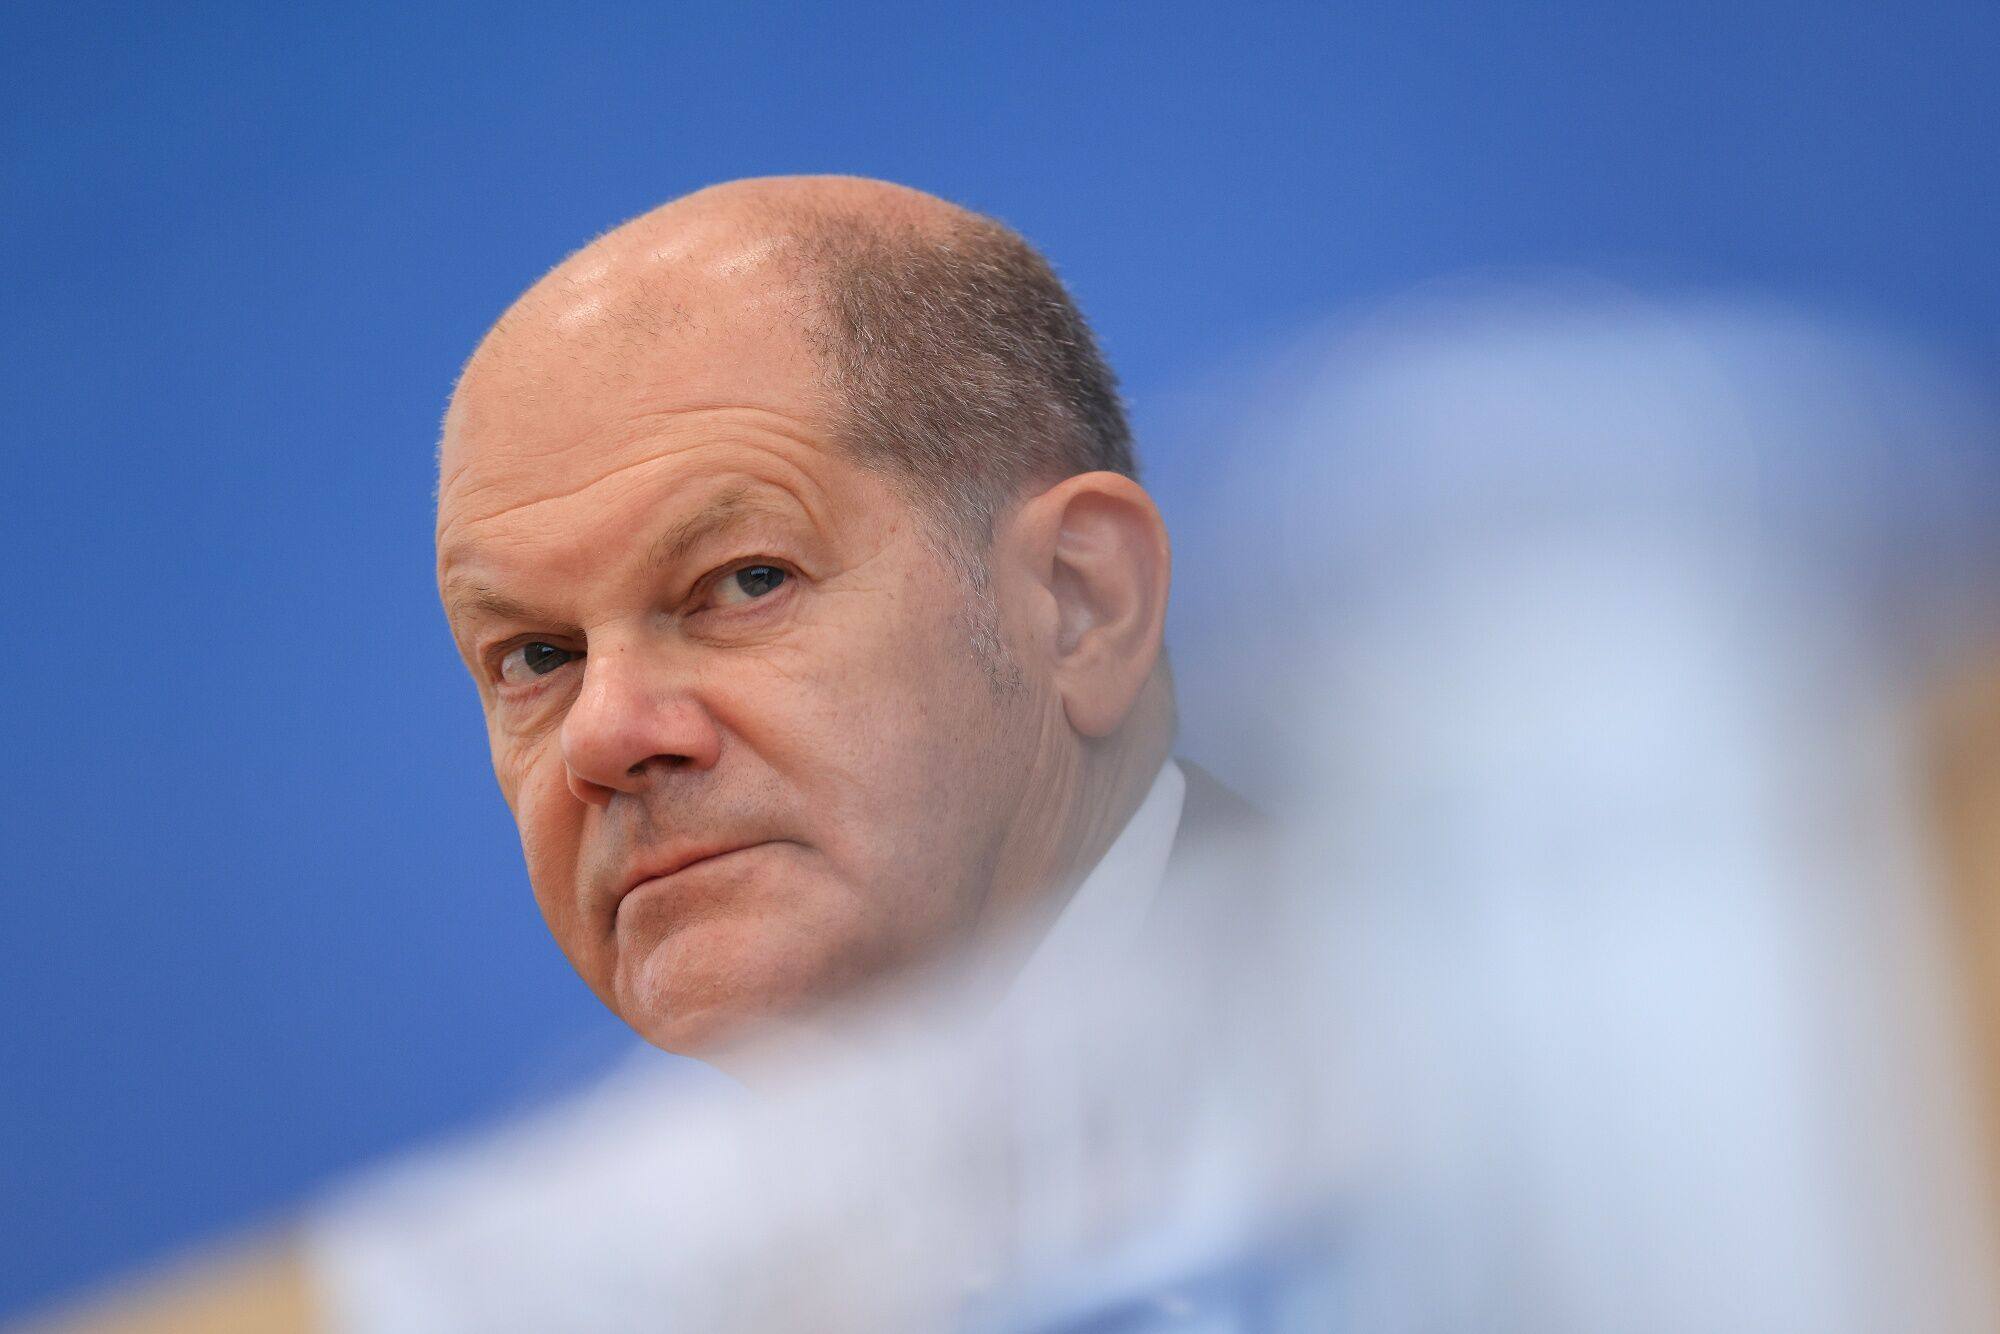 Olaf Scholz, Germany’s chancellor, takes part in a news conference in Berlin on Wednesday. Photo: Bloomberg